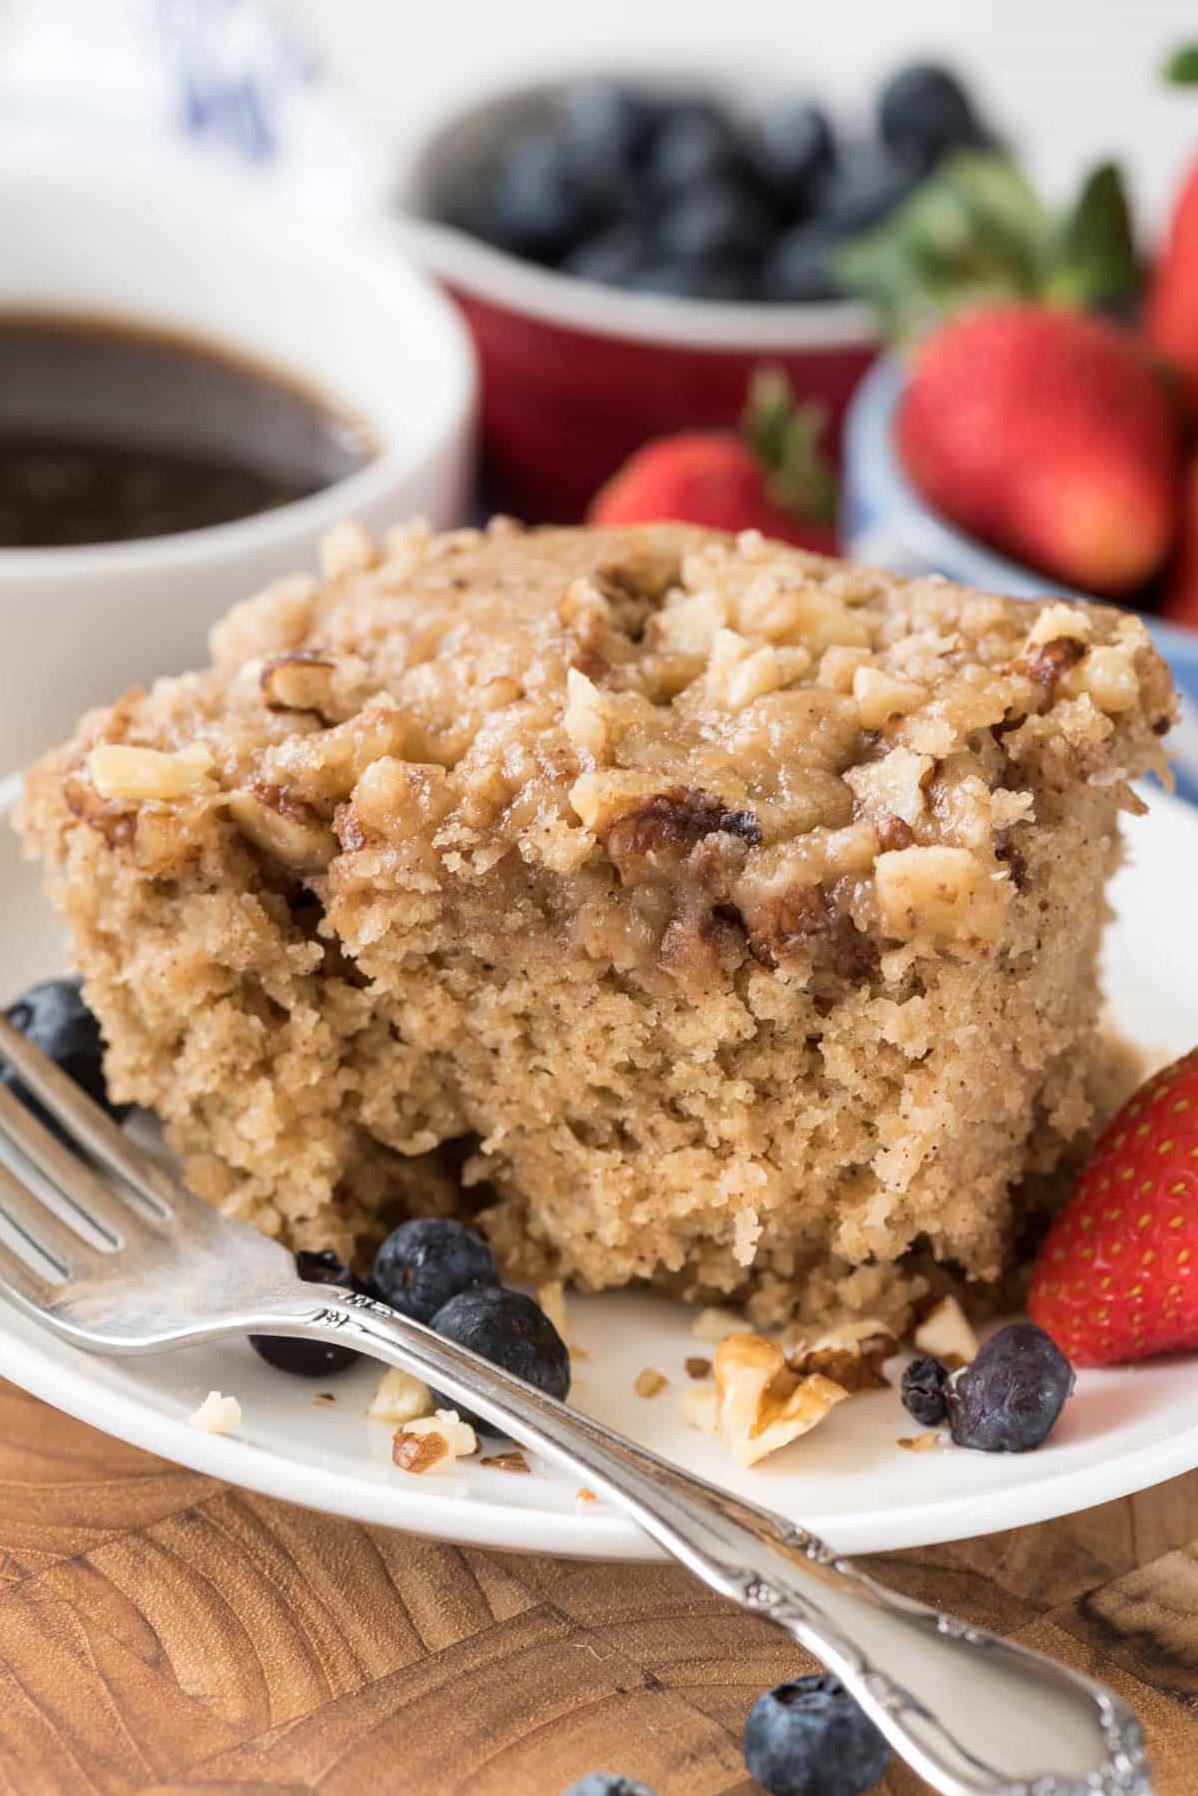  Wake up and smell the coffee cake!